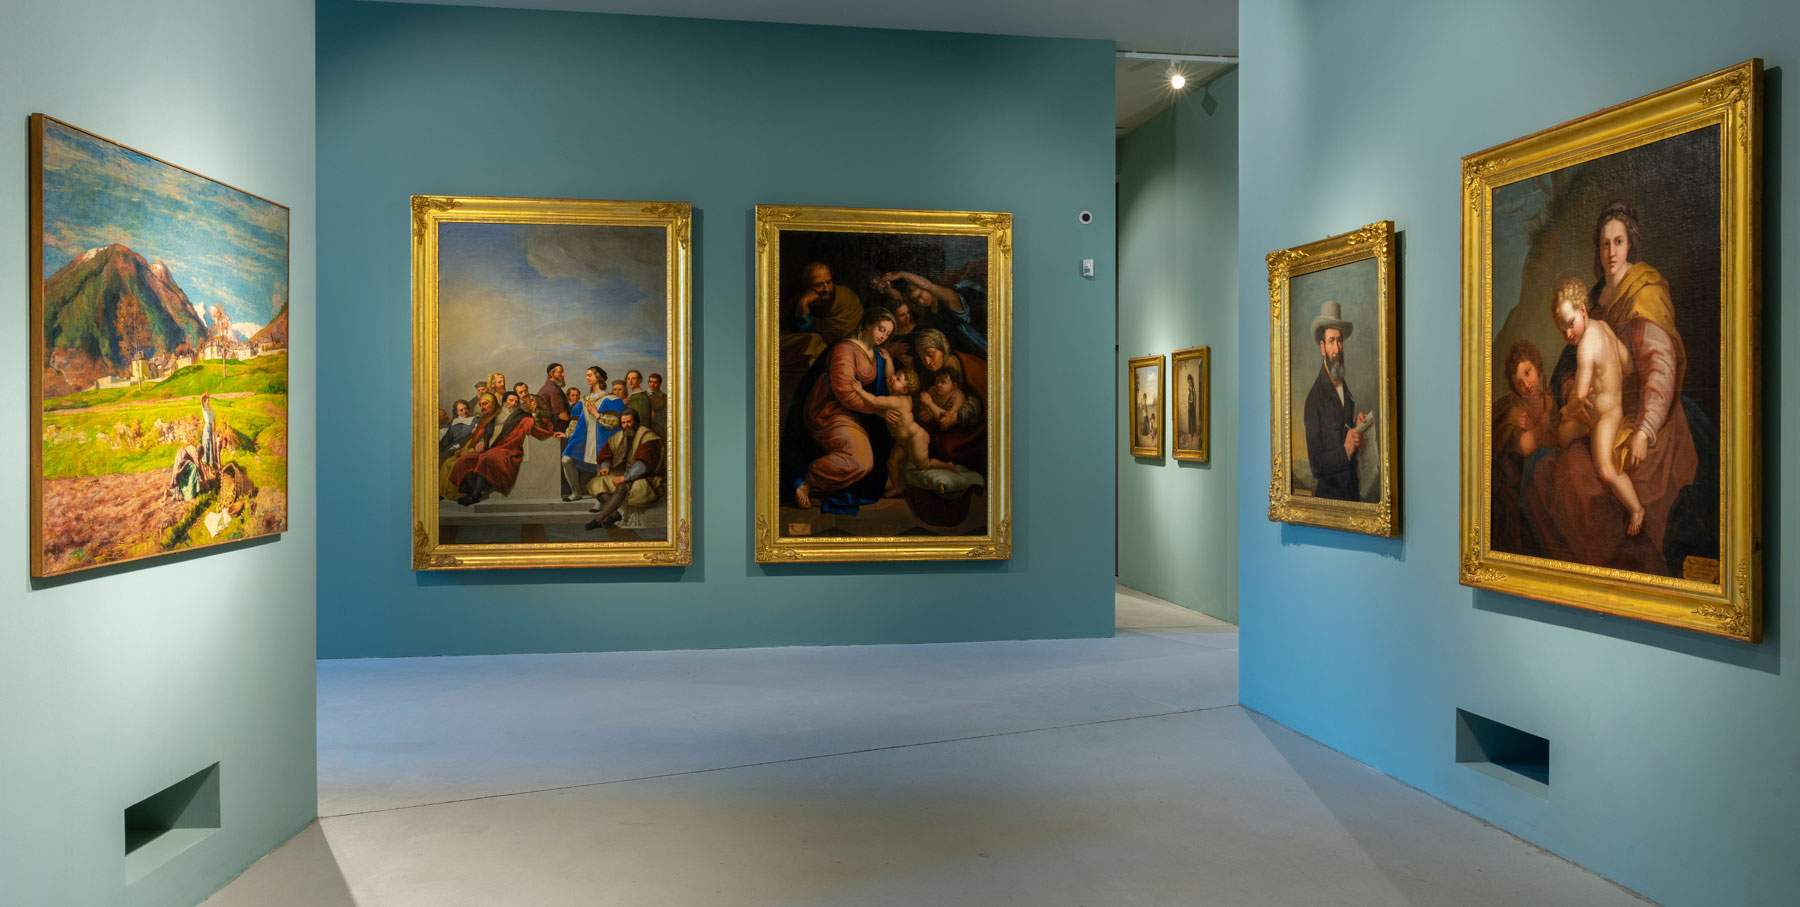 A new museum opens in Domodossola: the Gian Giacomo Galletti Civic Museums 